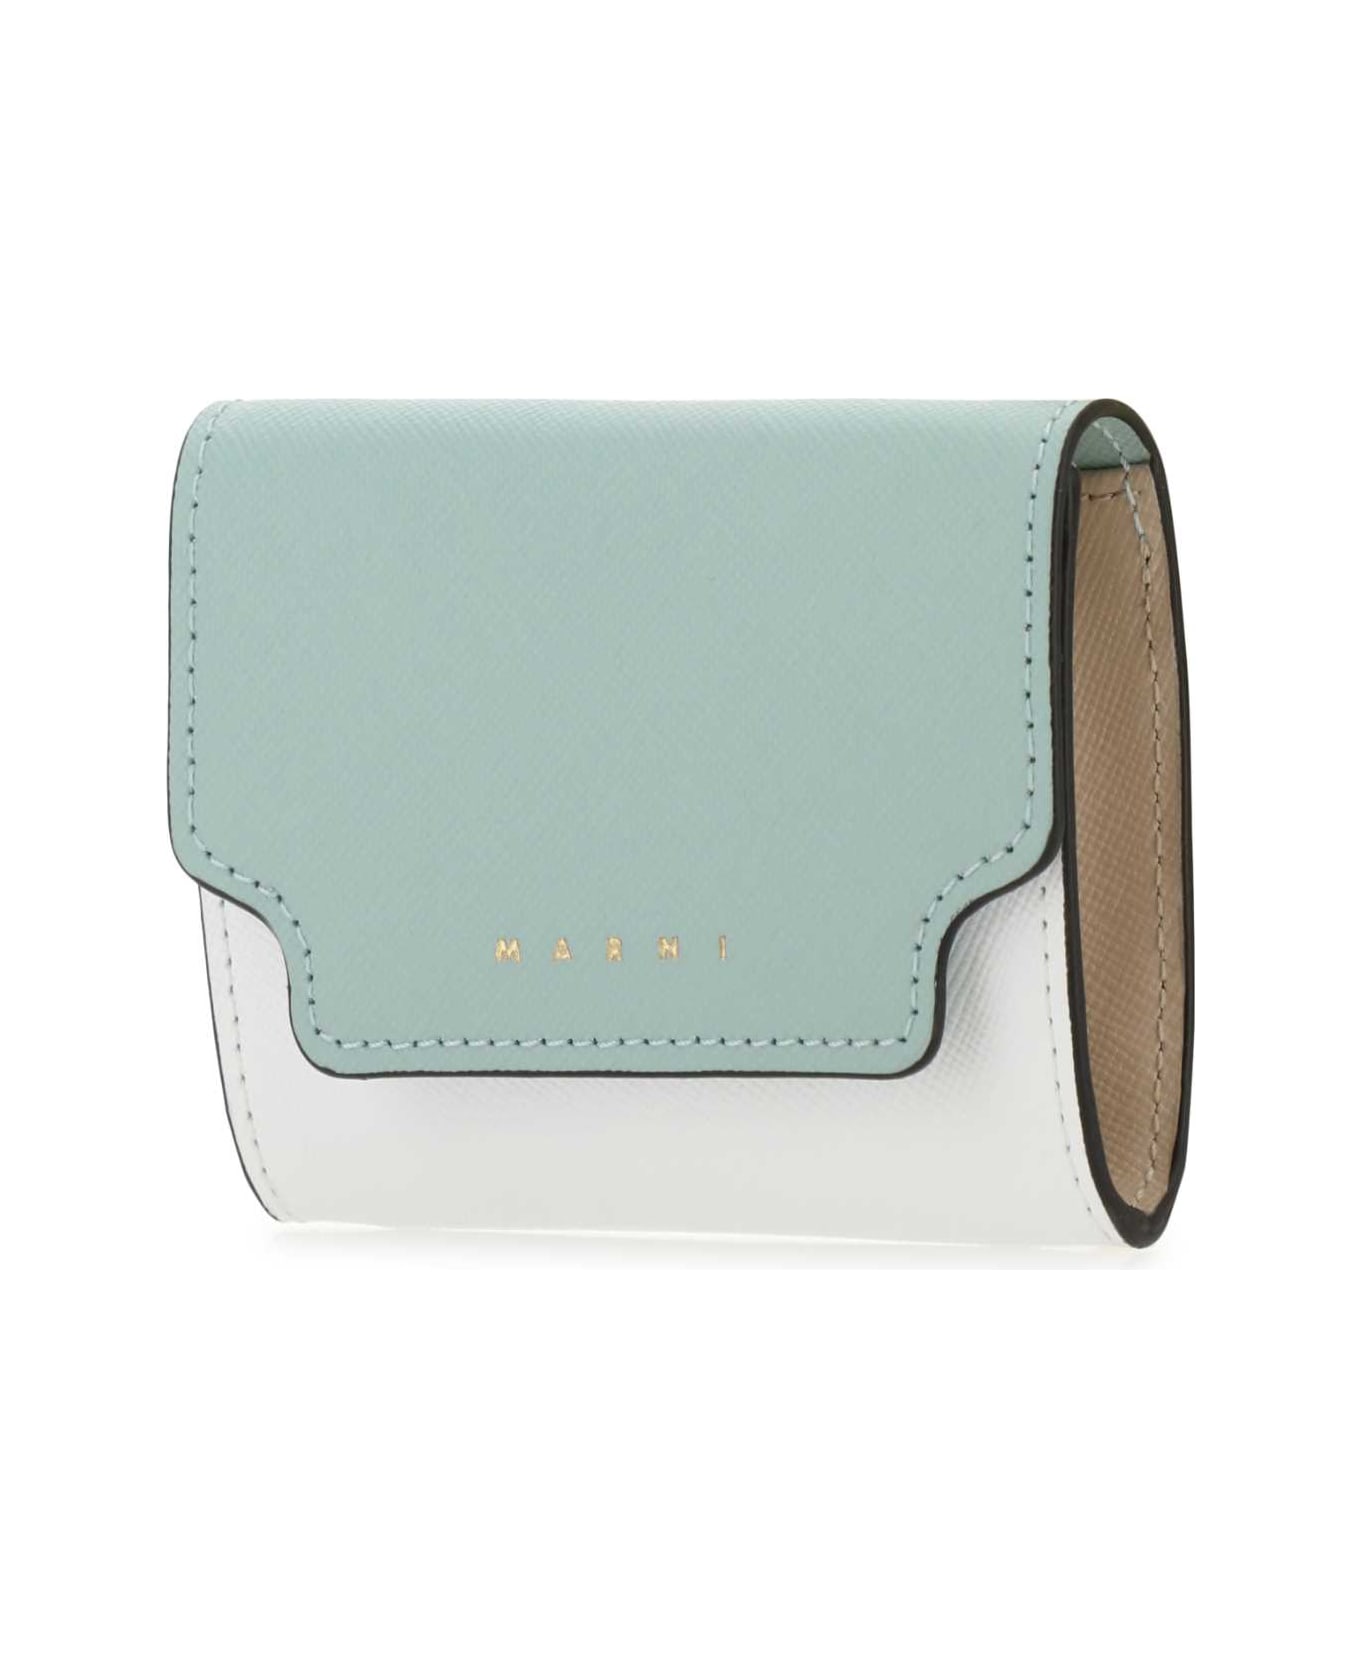 Marni Two-tone Leather Coin Purse - Z120N